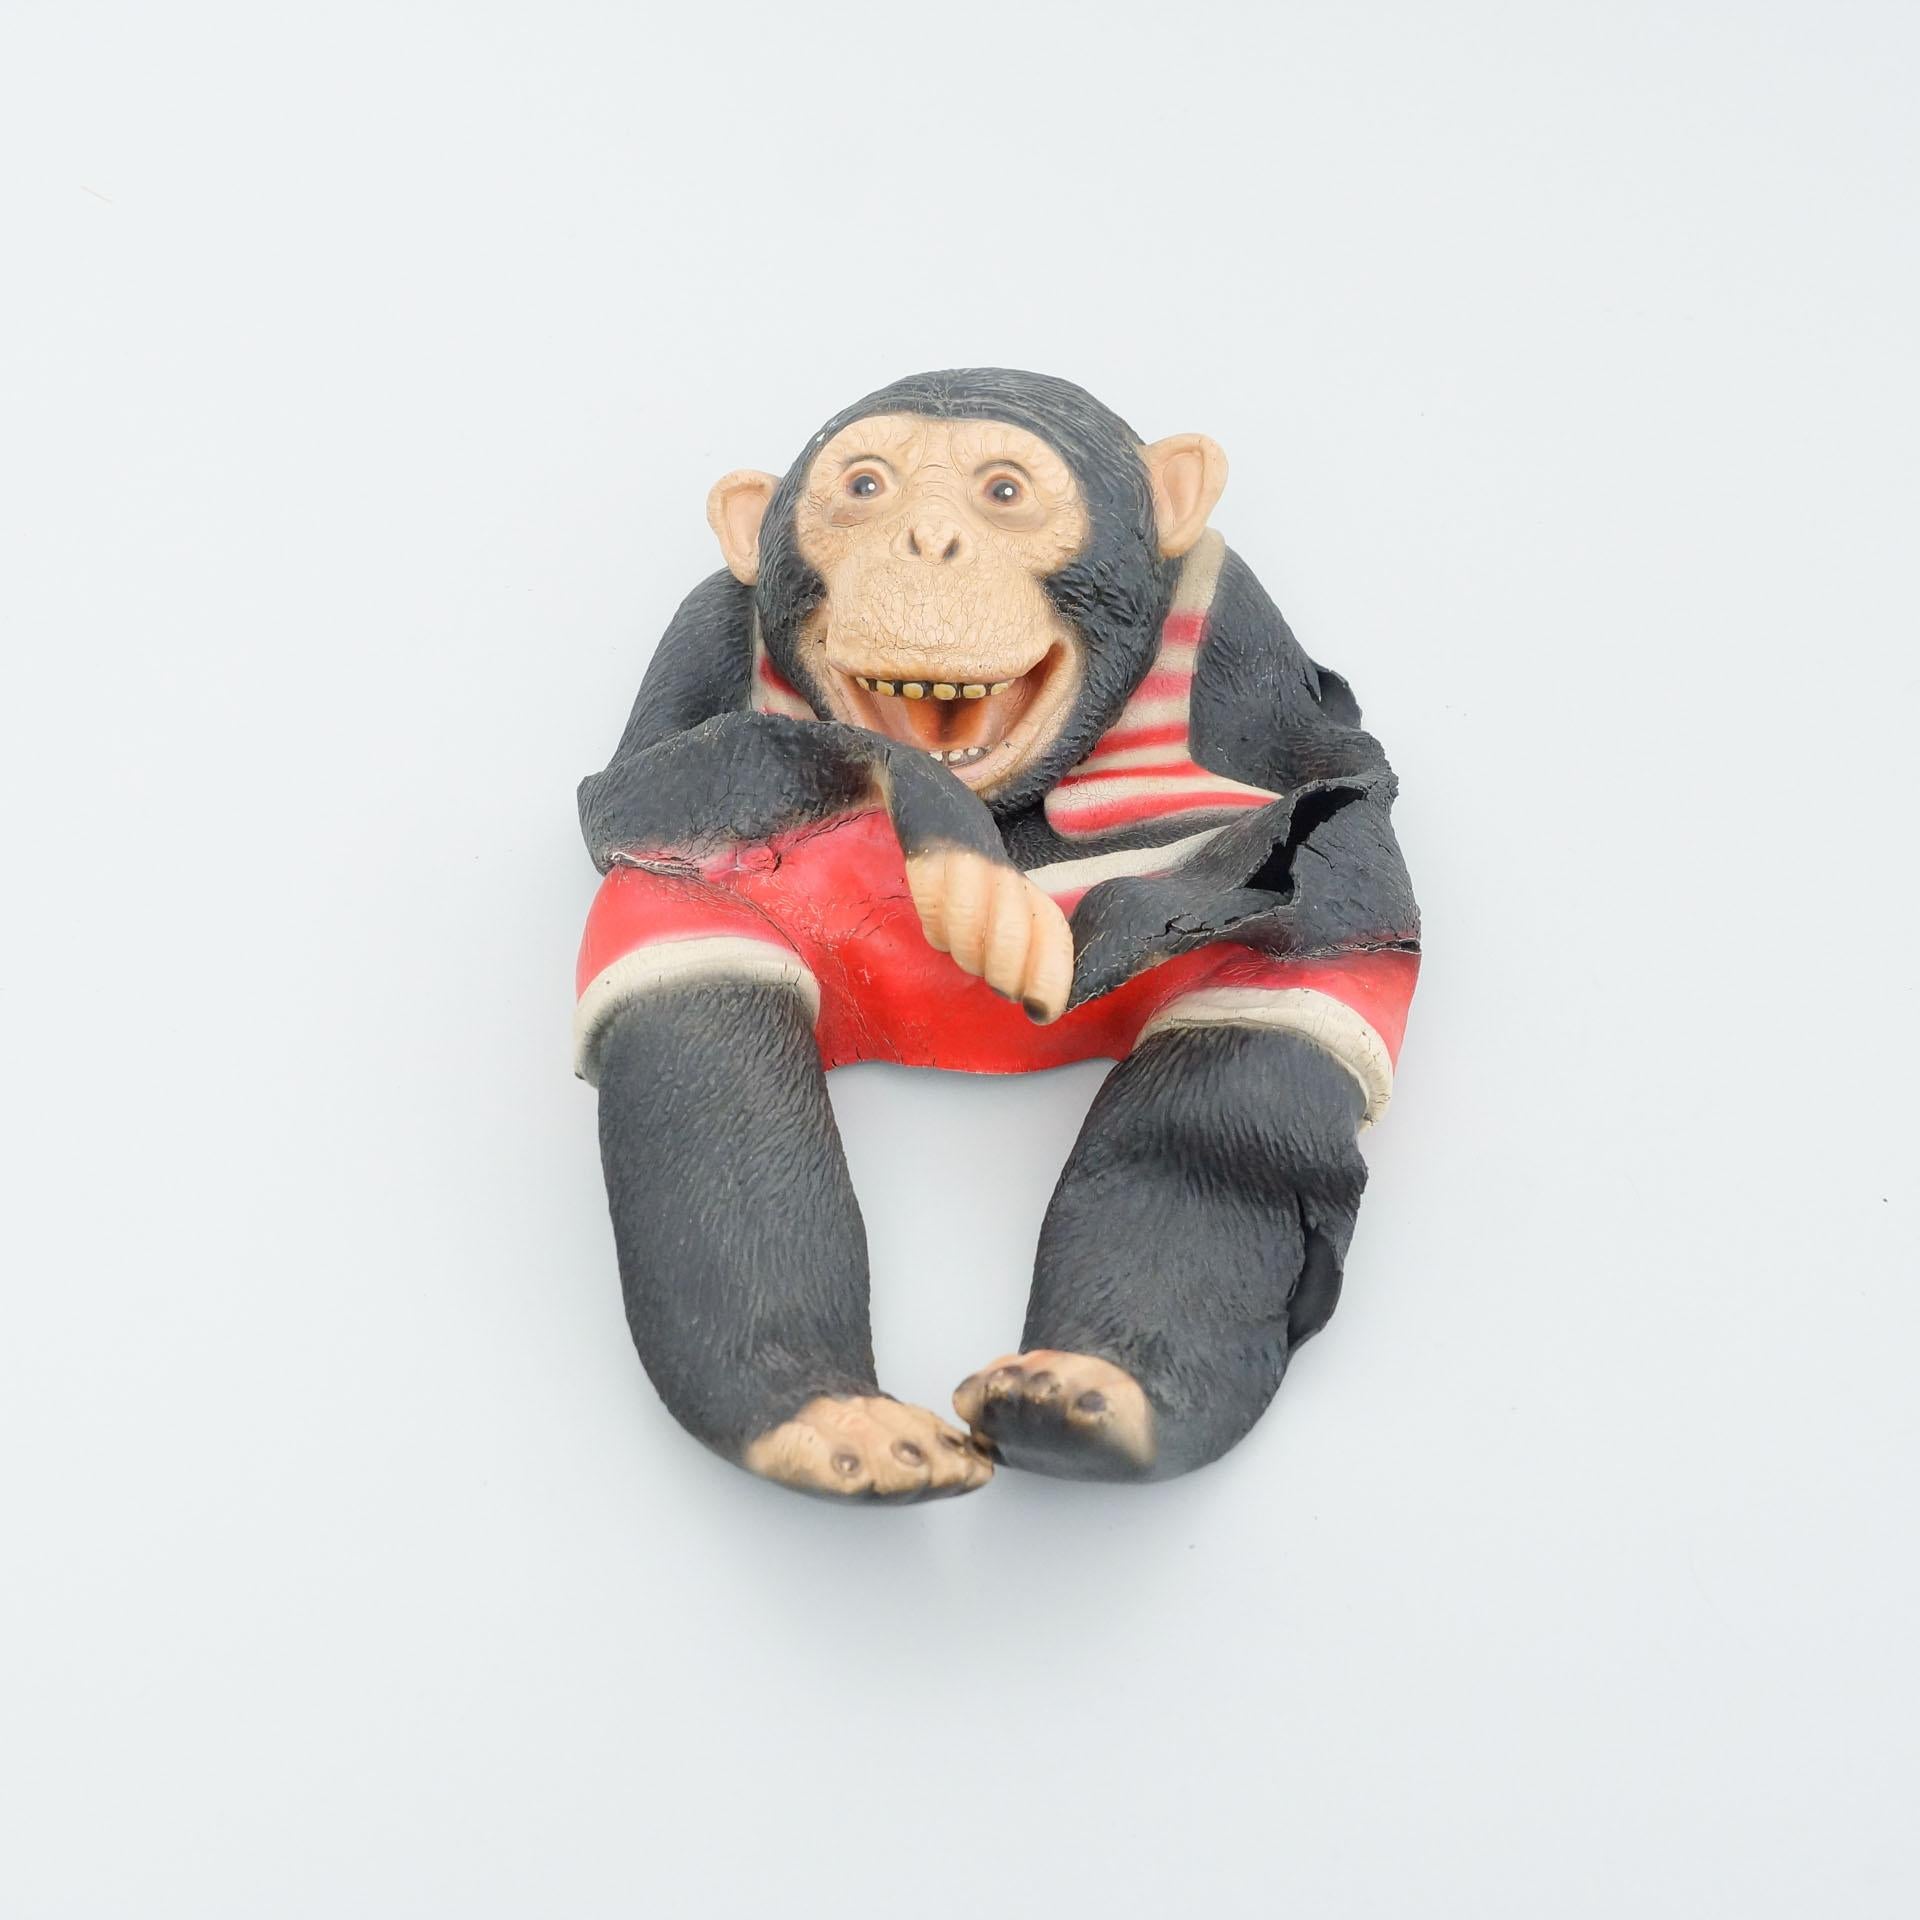 Chimpanzee rubber puppet, circa 1970.
By unknown manufacturer, from Spain.

In original condition, with some visible signs of previous use and age, preserving a beautiful patina.

Materials:
Rubber

Dimensions:
D 10 cm x W 19 cm x H 192 cm.